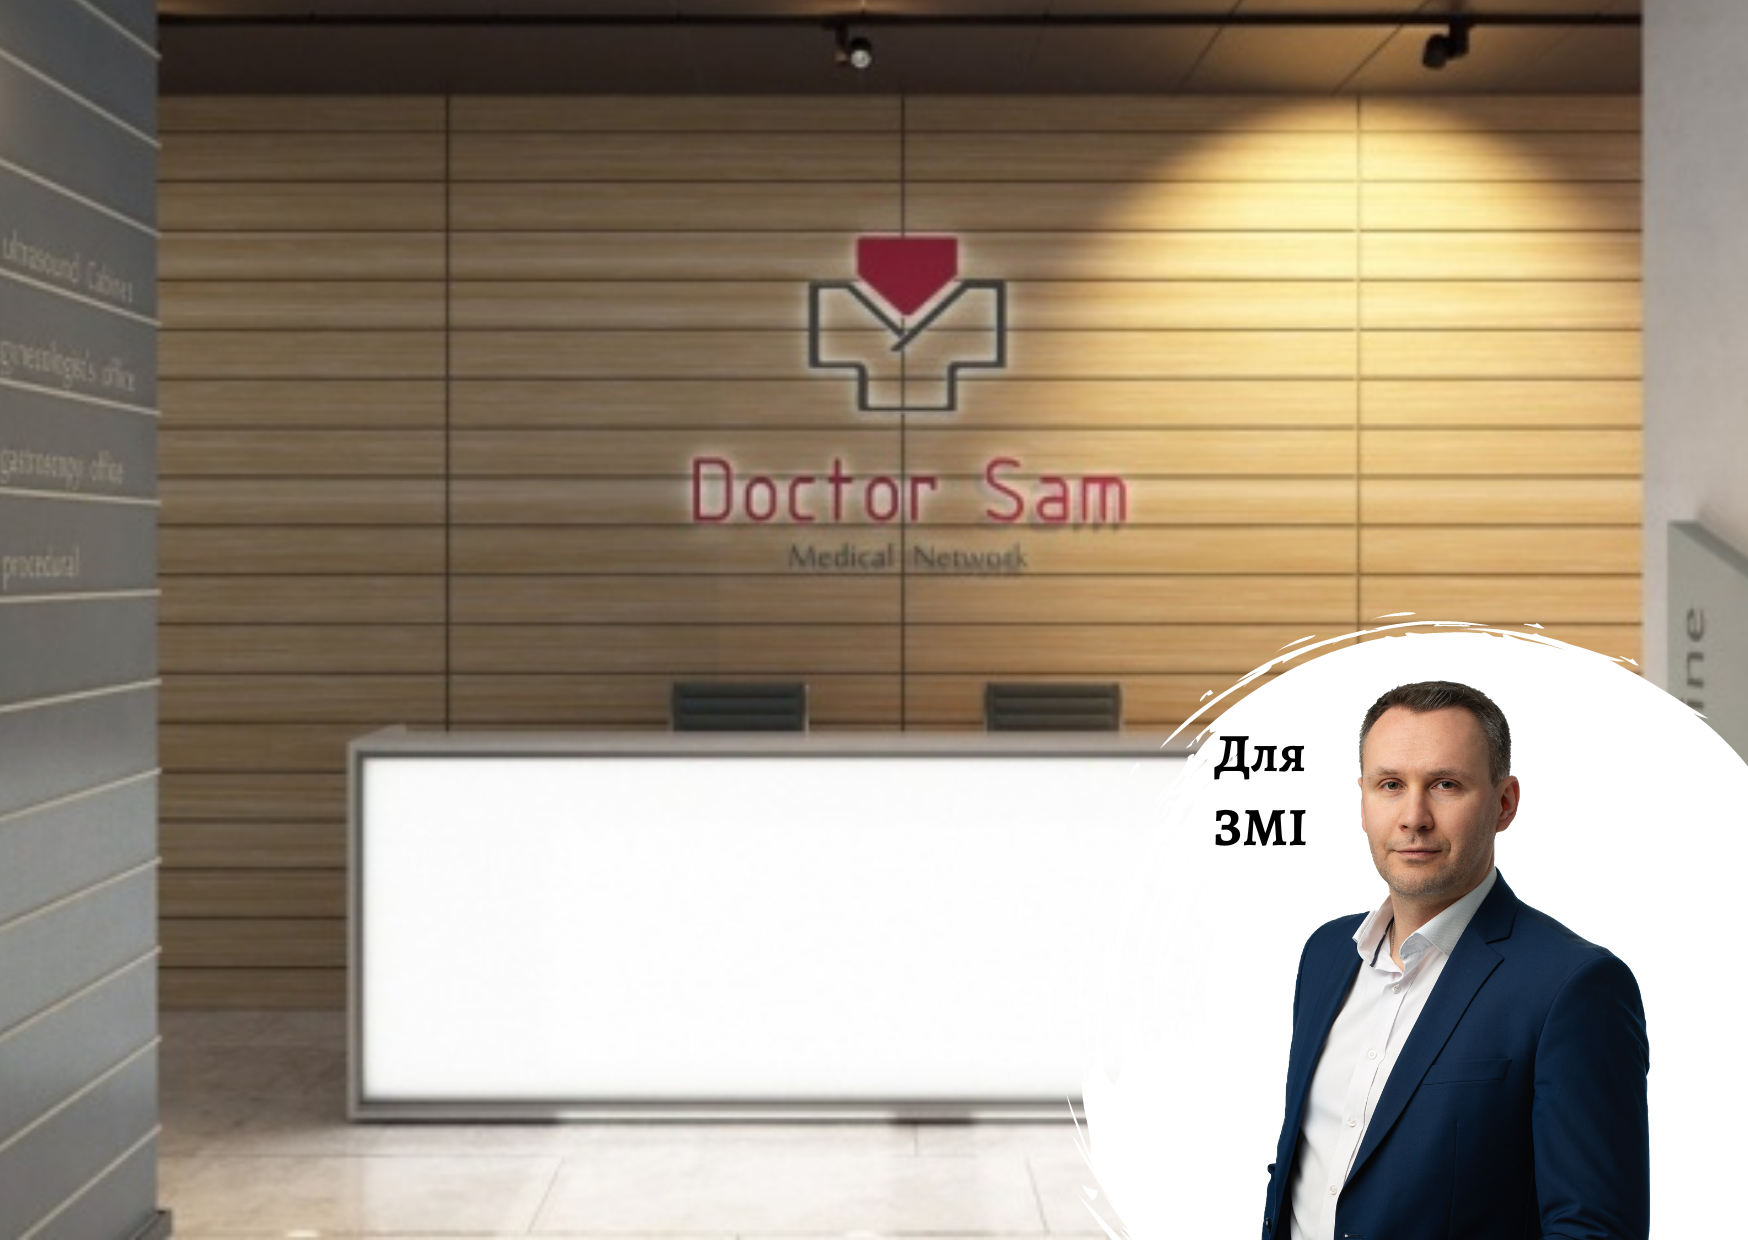 The owner of Silpo Kostelman invested in the Doctor Sam medical network - comments on the market by Pro-Consulting CEO Oleksander Sokolov. ECONOMIC TRUTH